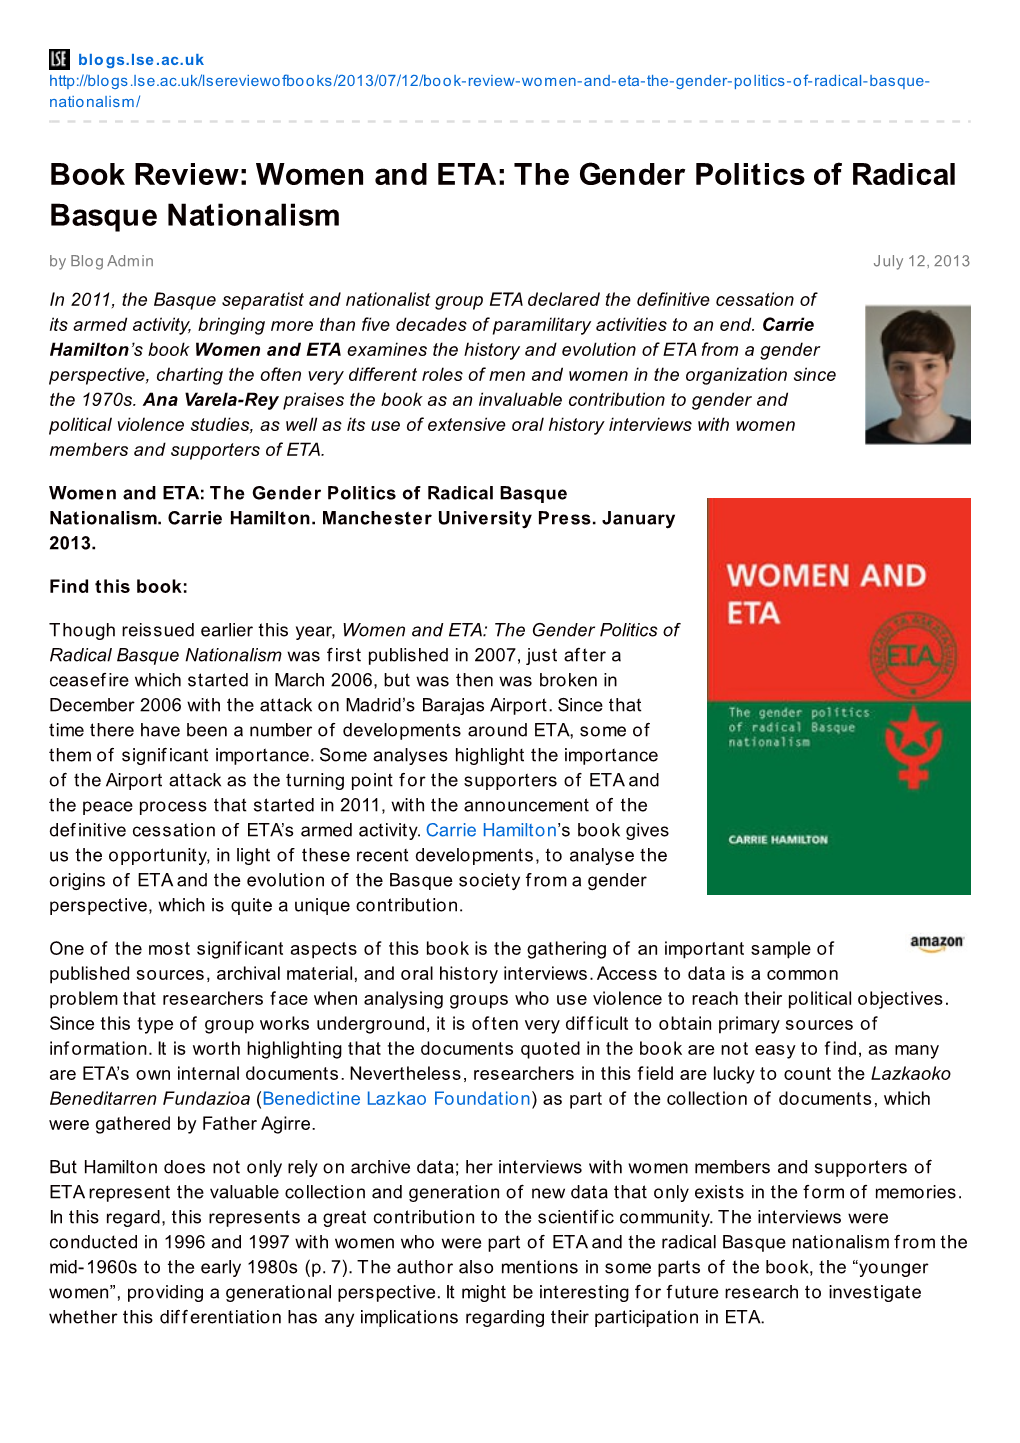 Book Review: Women and ETA: the Gender Politics of Radical Basque Nationalism by Blog Admin July 12, 2013